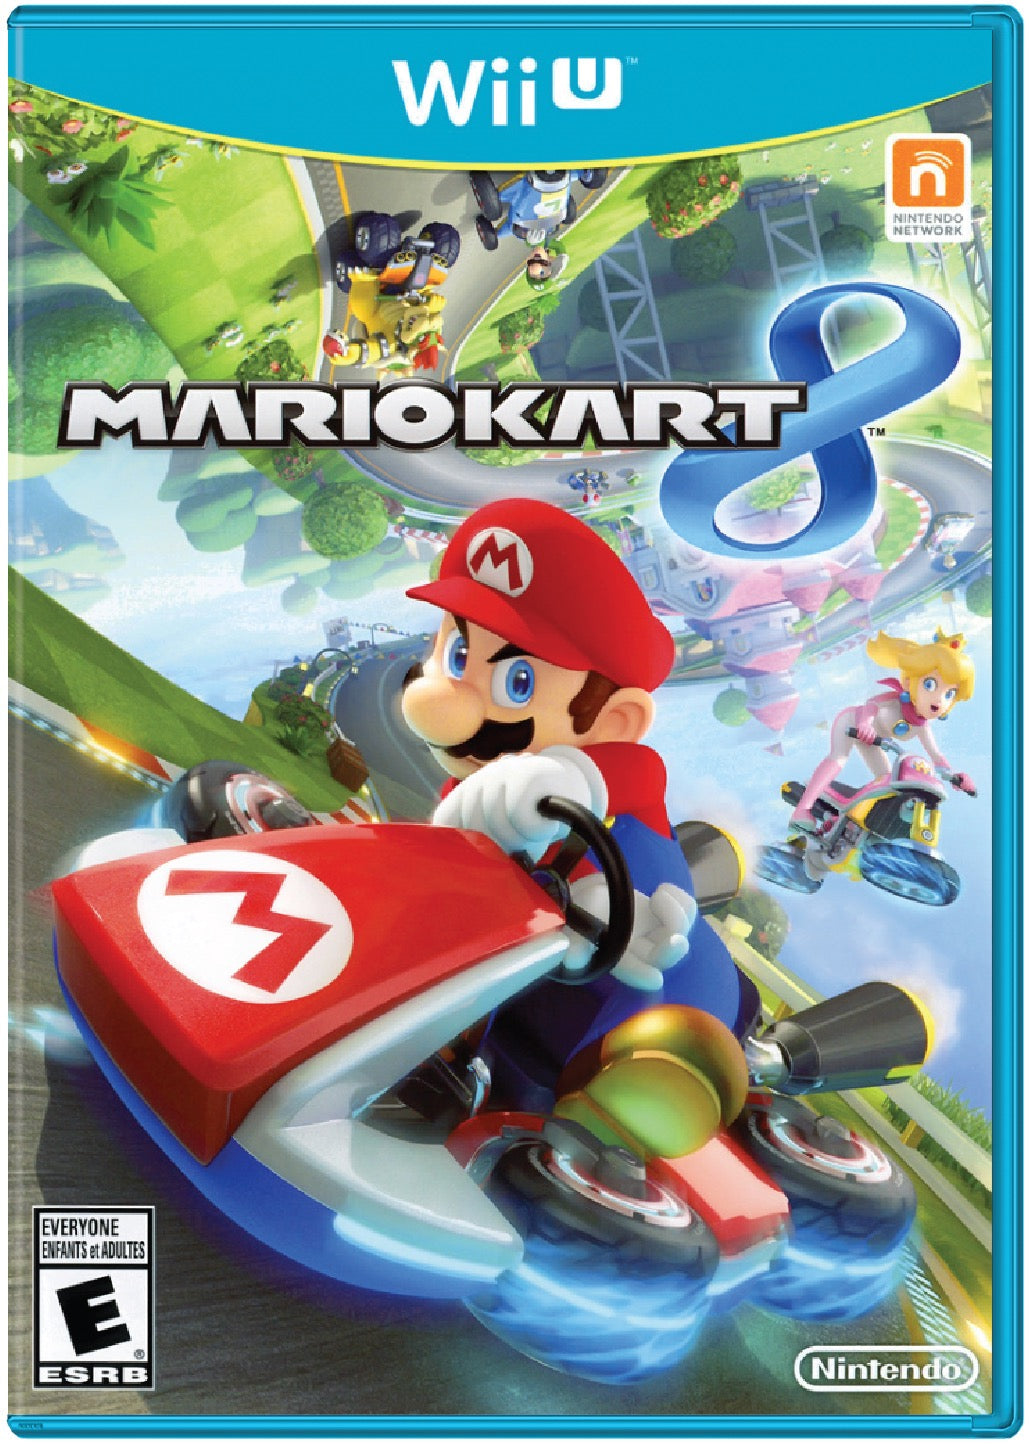 Mario Kart 8 Cover Art and Product Photo